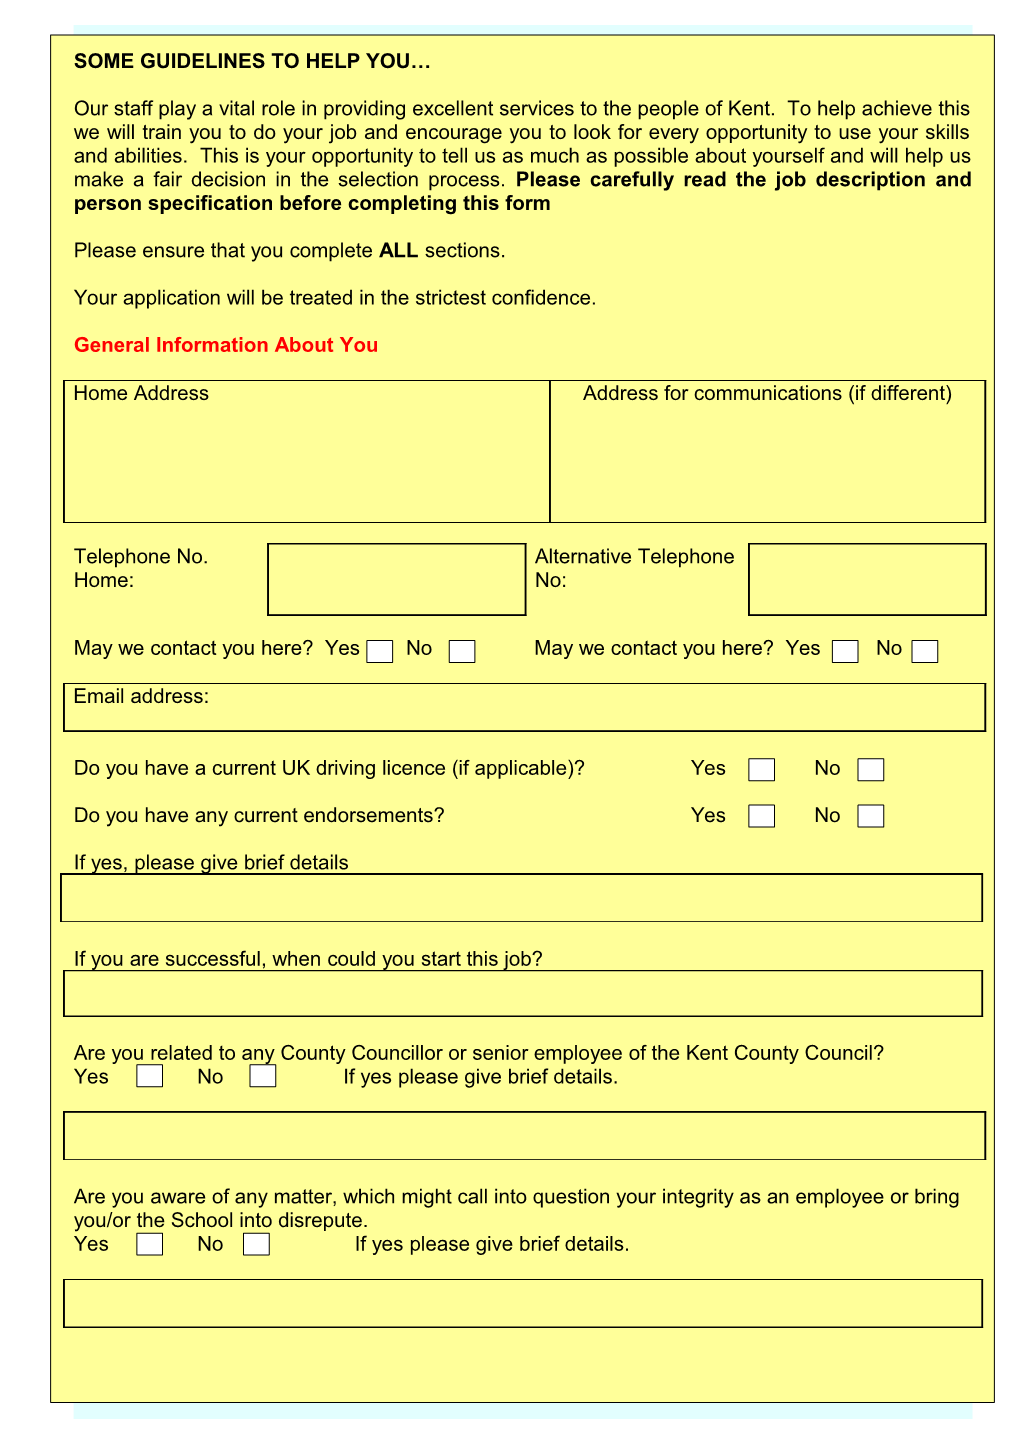 Please Ensure You Complete the Equalities Monitoring Form